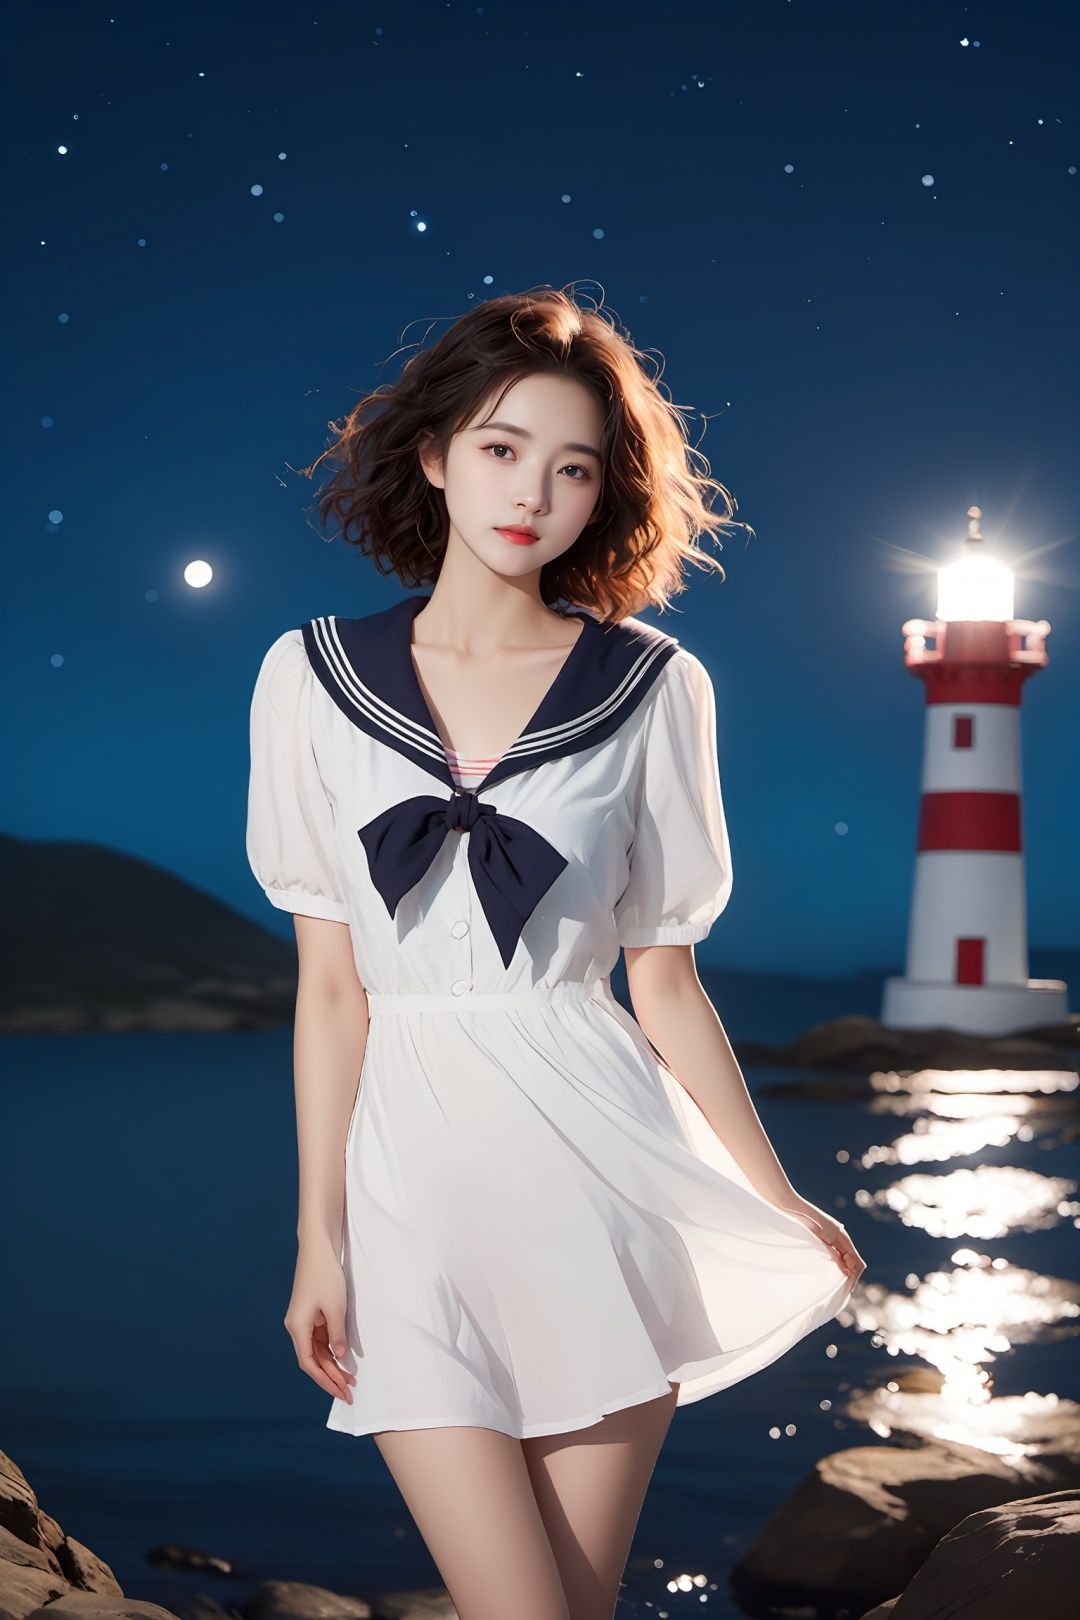 Real photos (1girl: 1.2),  curly hair,  (sailor suit: 1.3),  (realistic style),  (lonely lighthouse standing on the shore),  (night),  (moonlight),  (breeze),  (sparkling water),  a clear stream flowing slowly,  (natural scenery),  (distant mountains),  (starry sky),  (peaceful atmosphere),  master work,  high detail,  (close-up of characters), MAJICMIX STYLE,<lora:EMS-89582-EMS:0.800000>